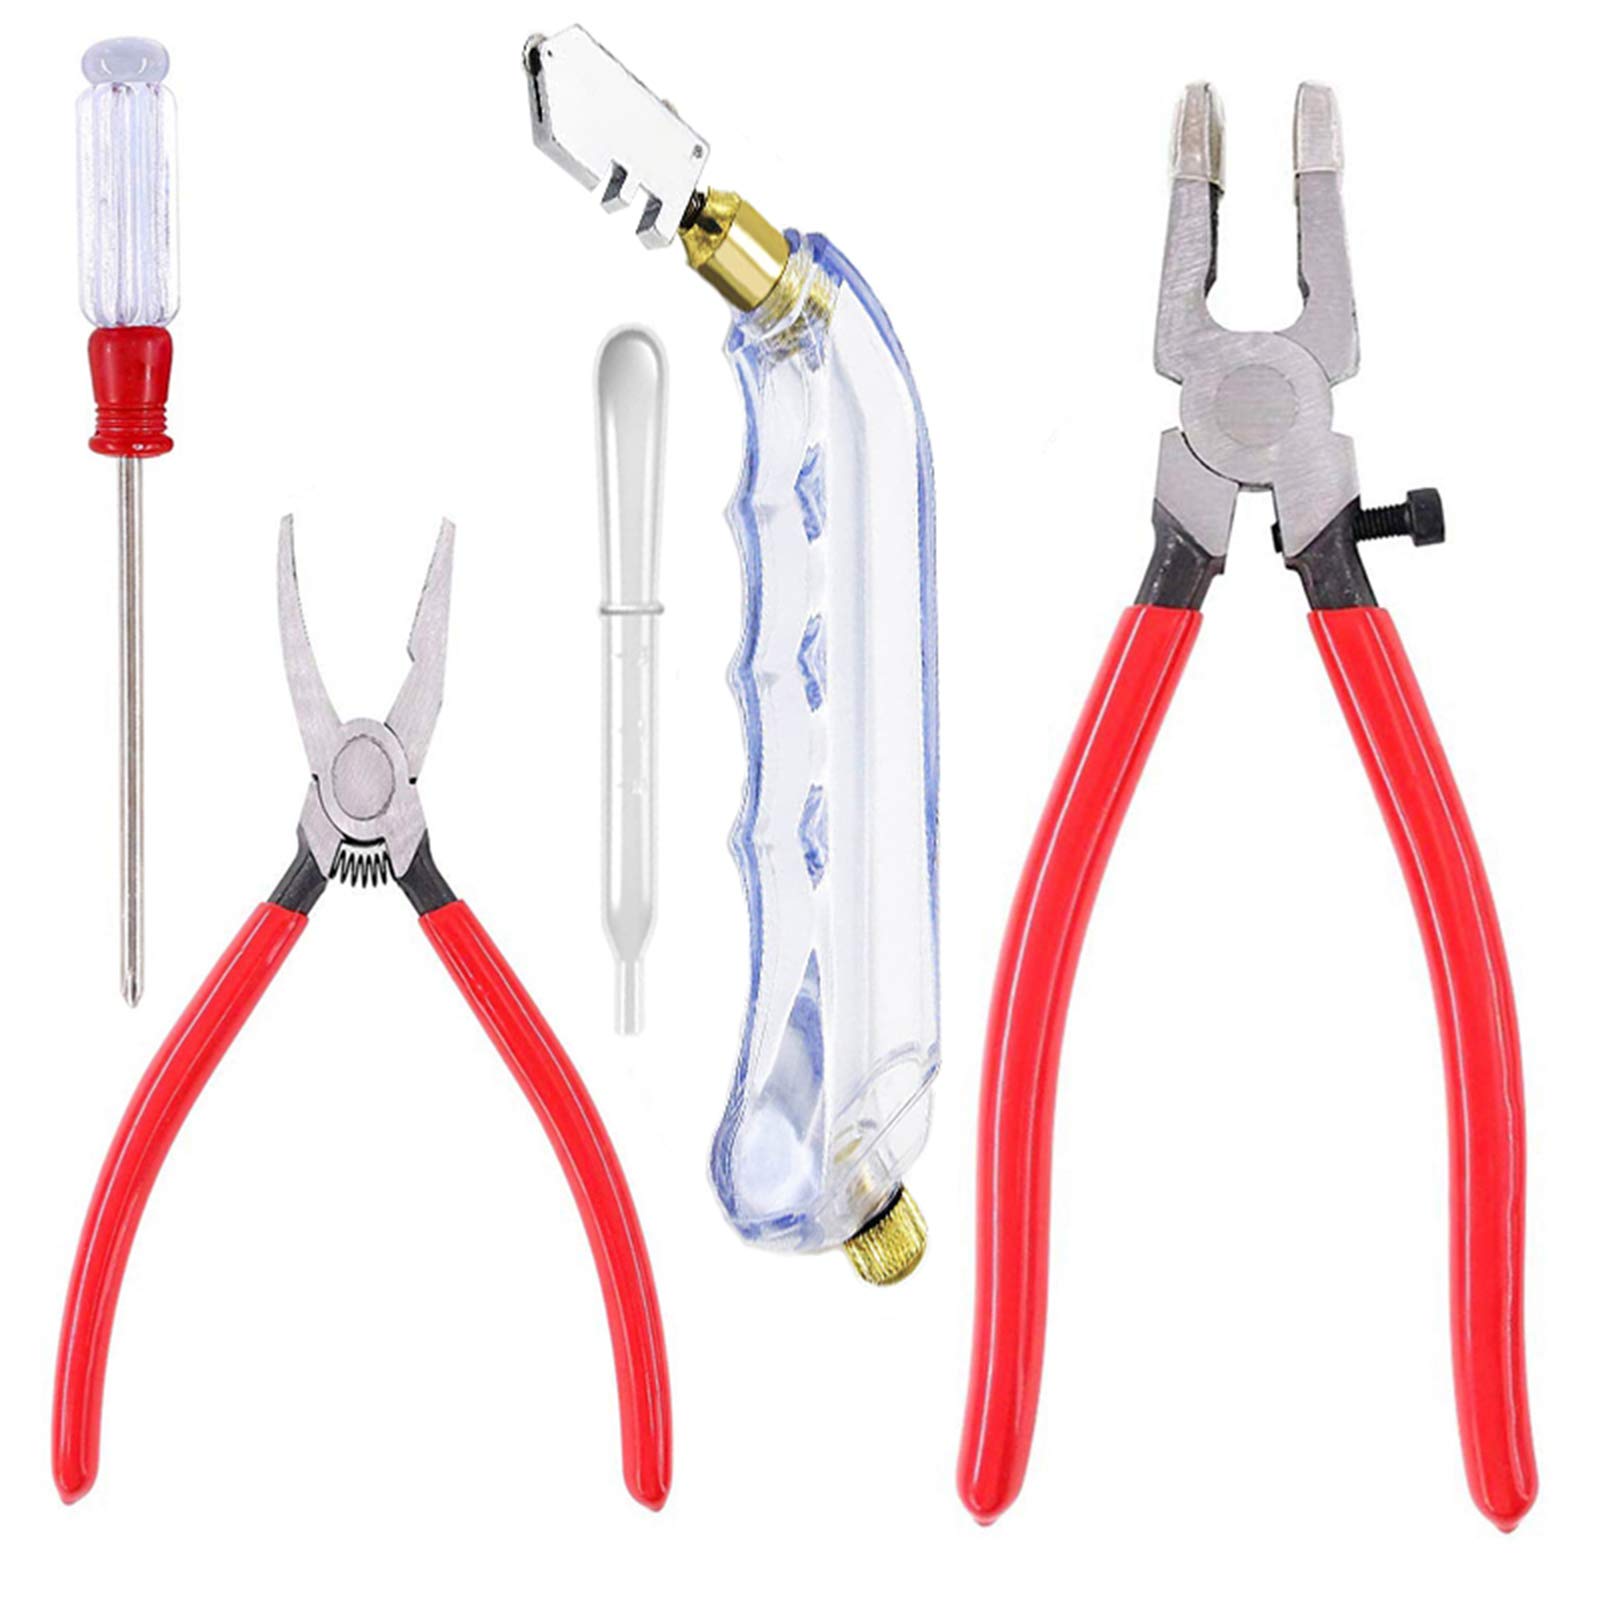 3-pcs Premium Glass Running Breaking Pliers And Pistol Grip Cutter Set  Glass Tool For Stained Glass, Mosaics And Fusing Work